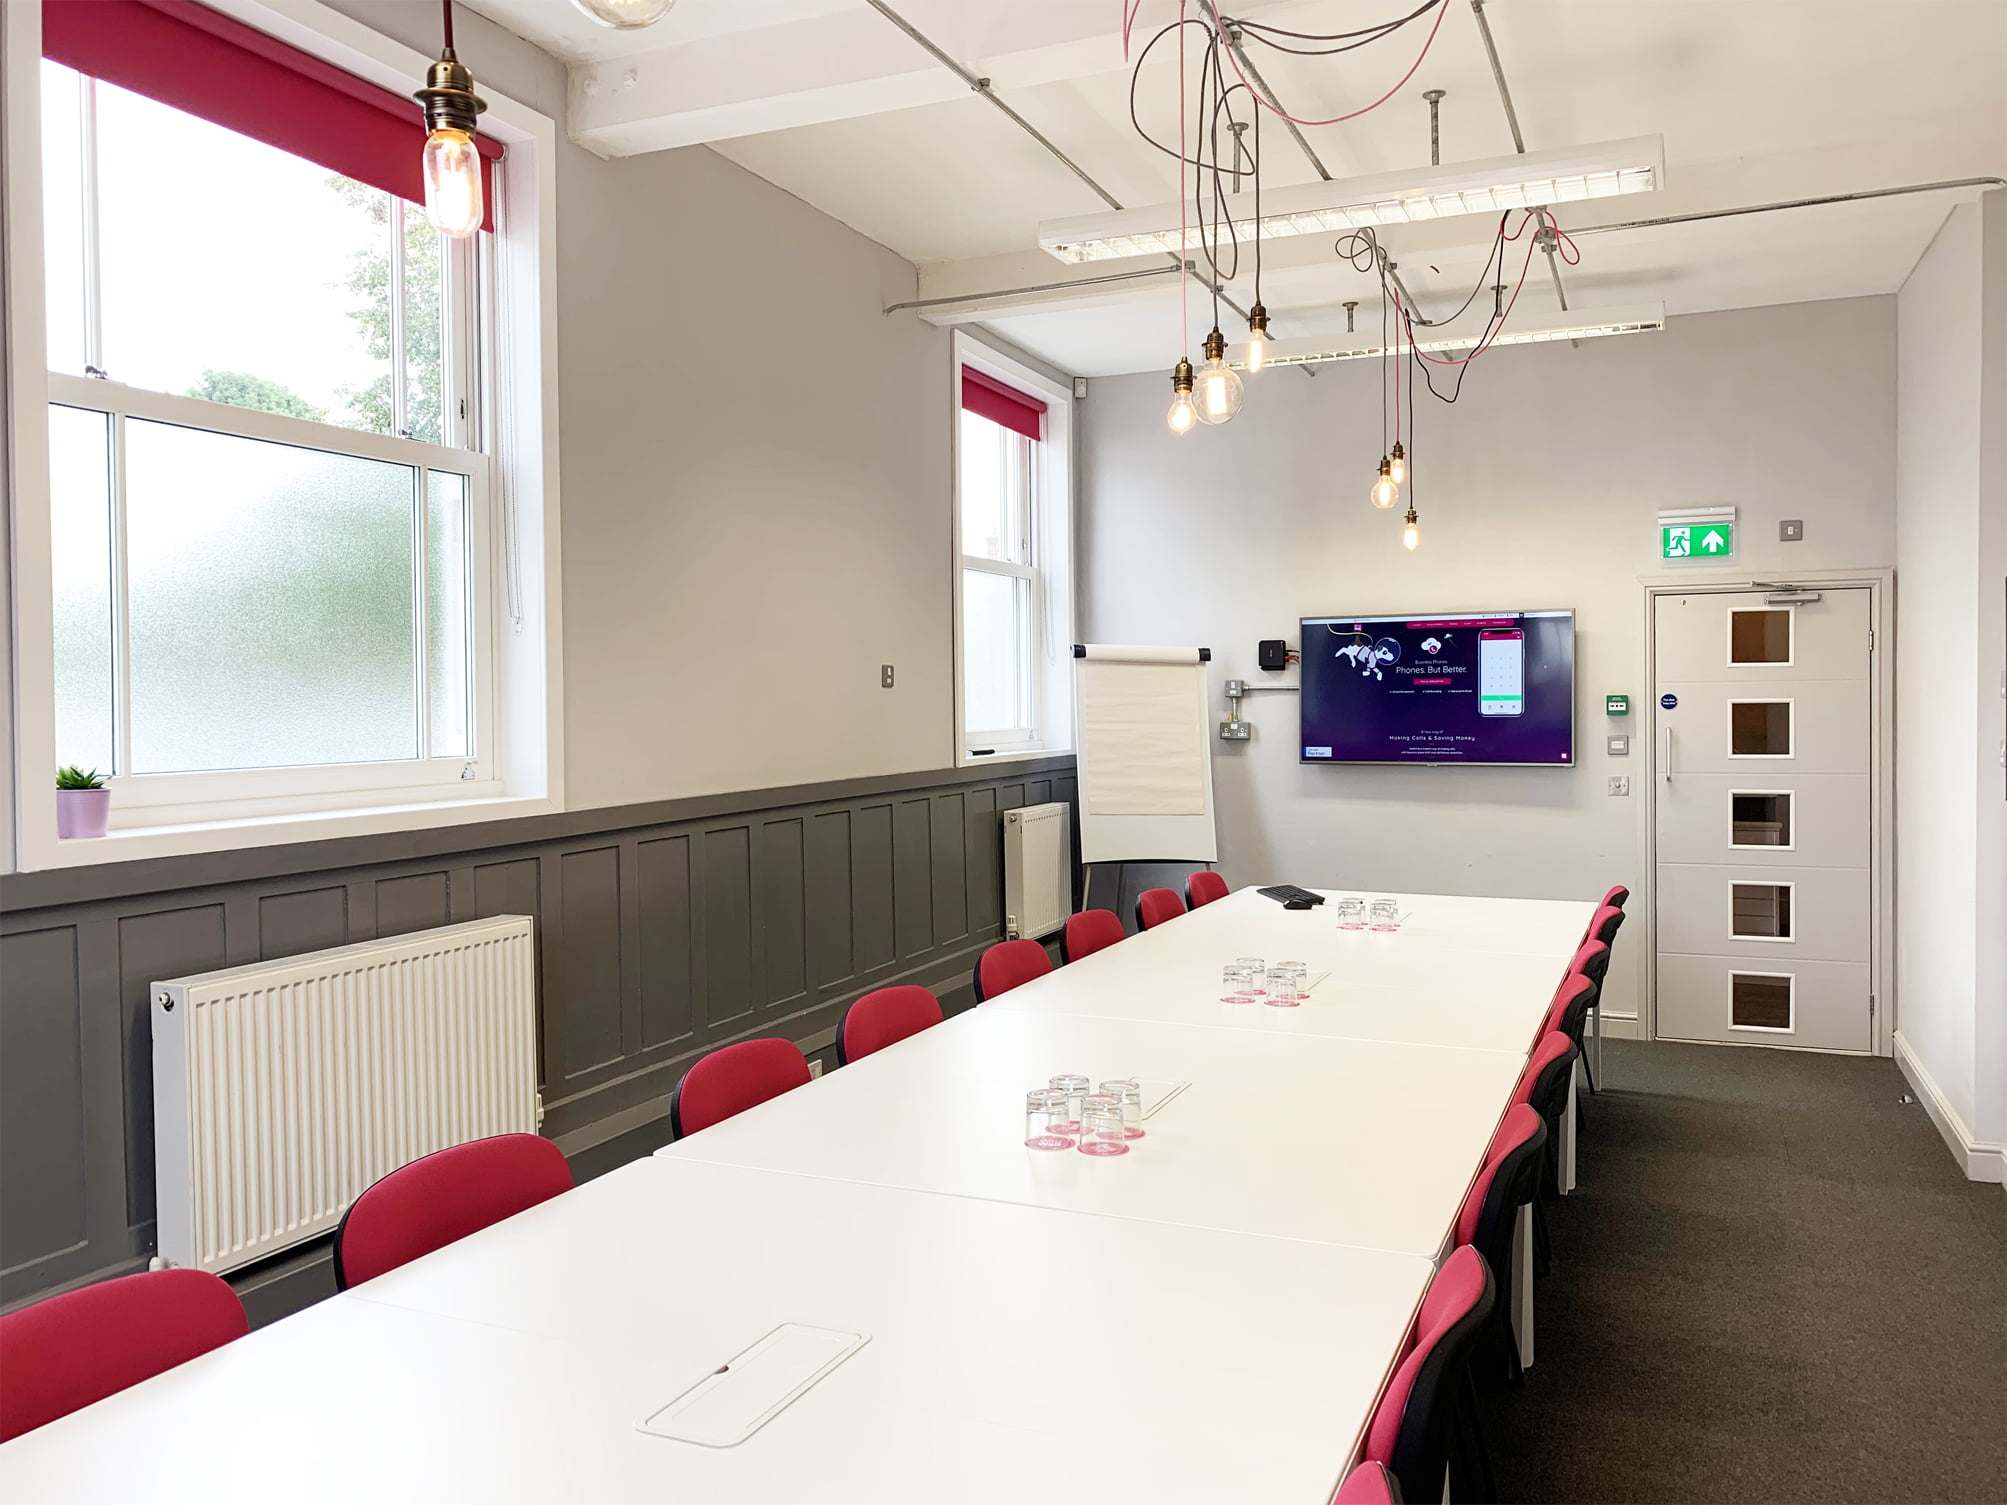 Meeting Rooms For Weekend Hire